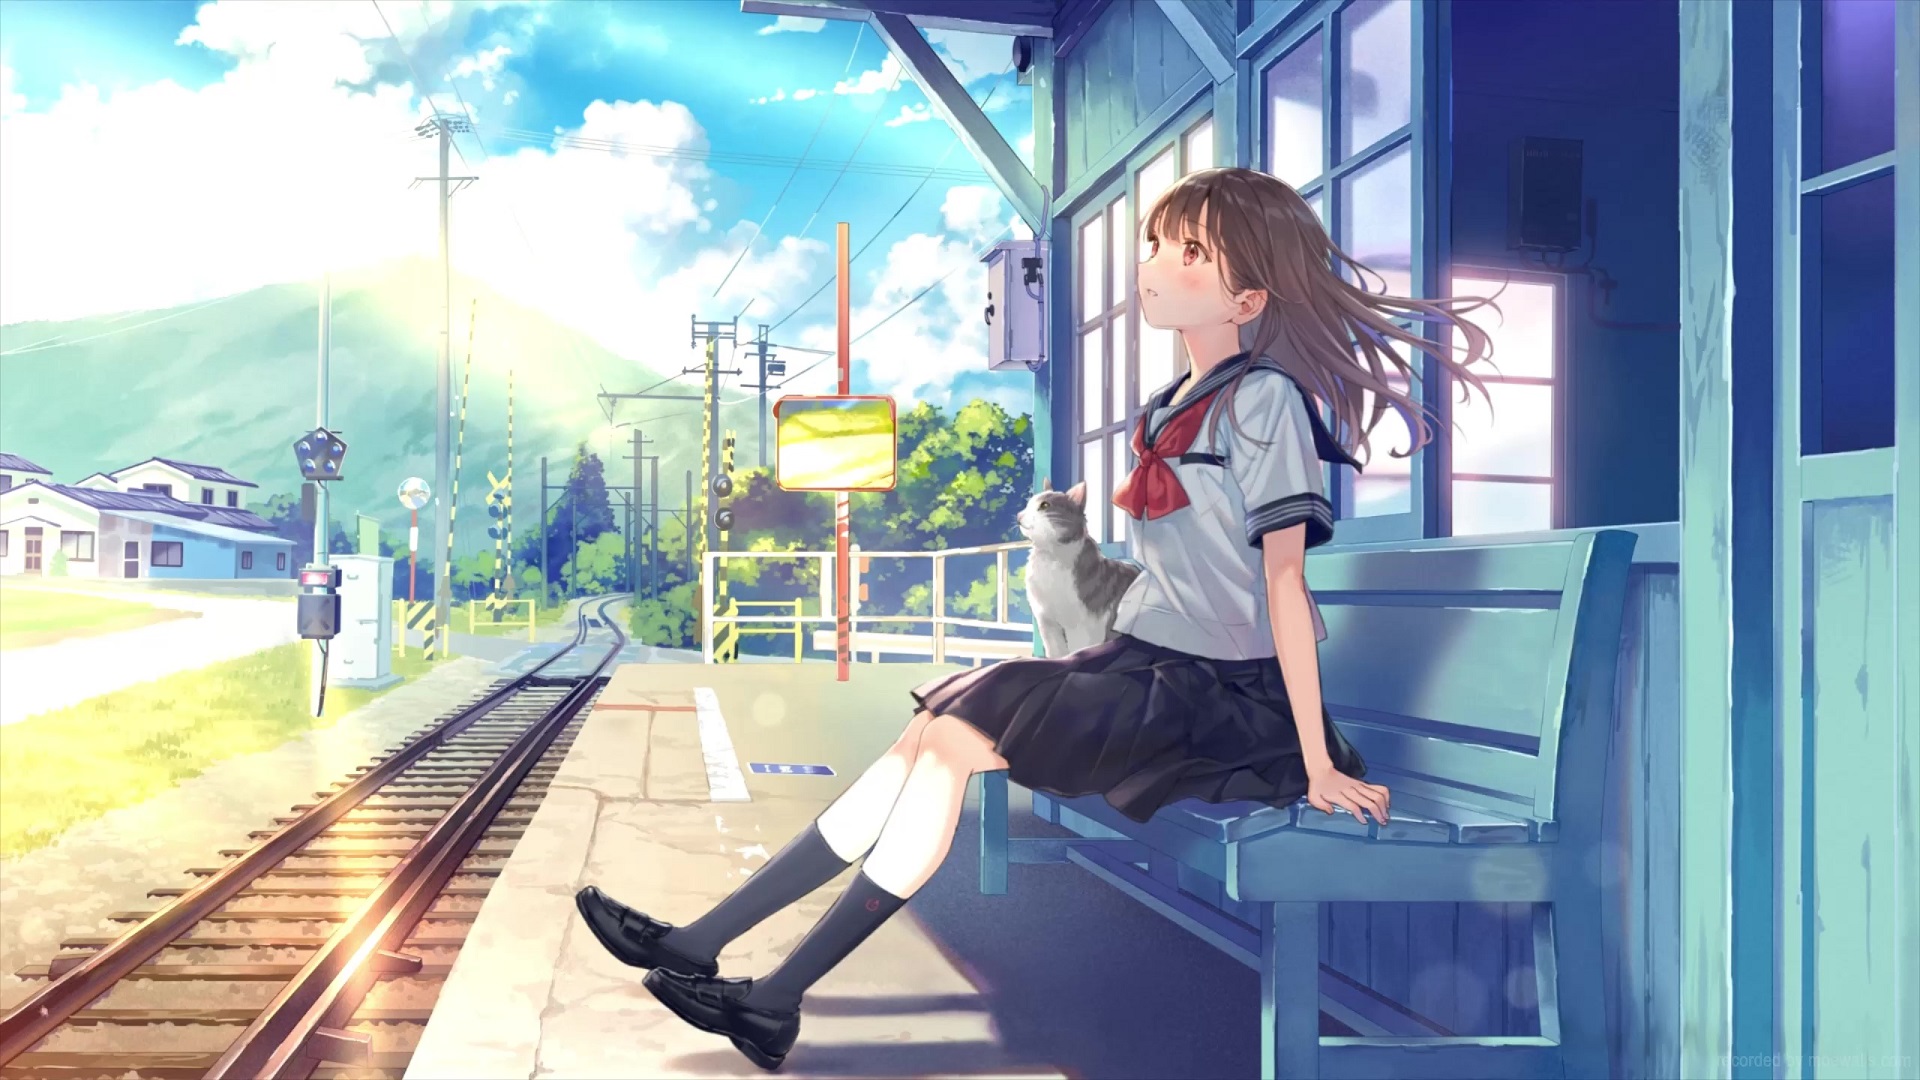 Anime School Girl Waiting For Train With Cat Live Wallpaper - MoeWalls